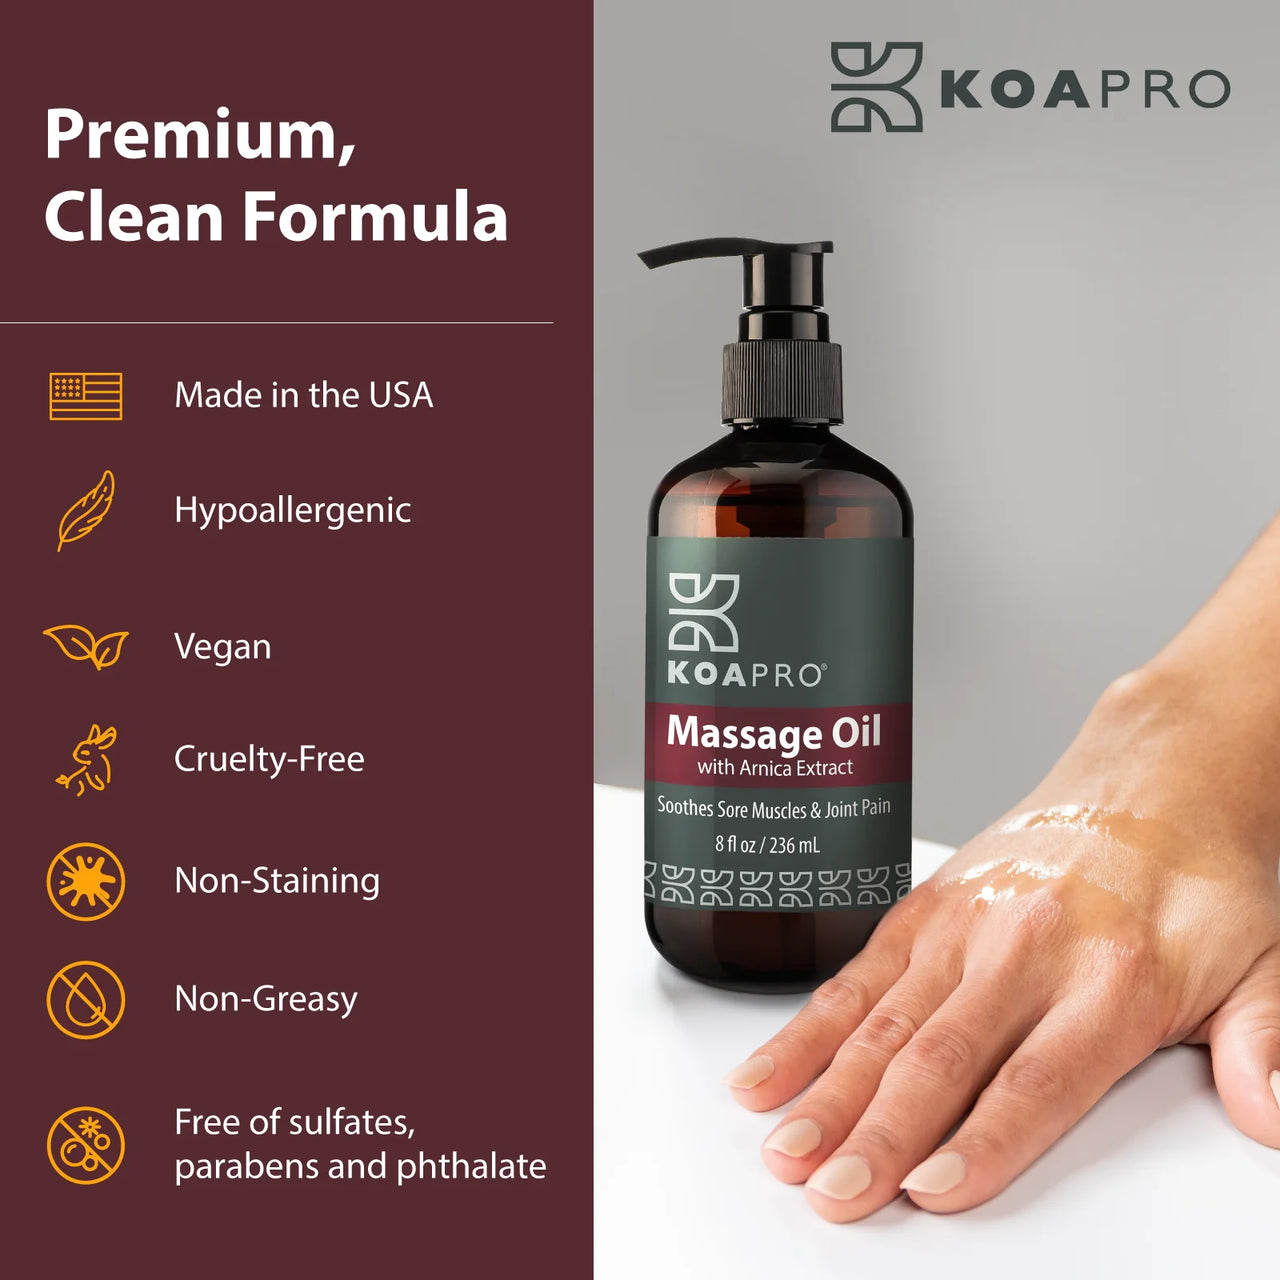 KOAPRO Massage Oil - Premium Clean Formula, Made in the USA.tions and Ingredients.